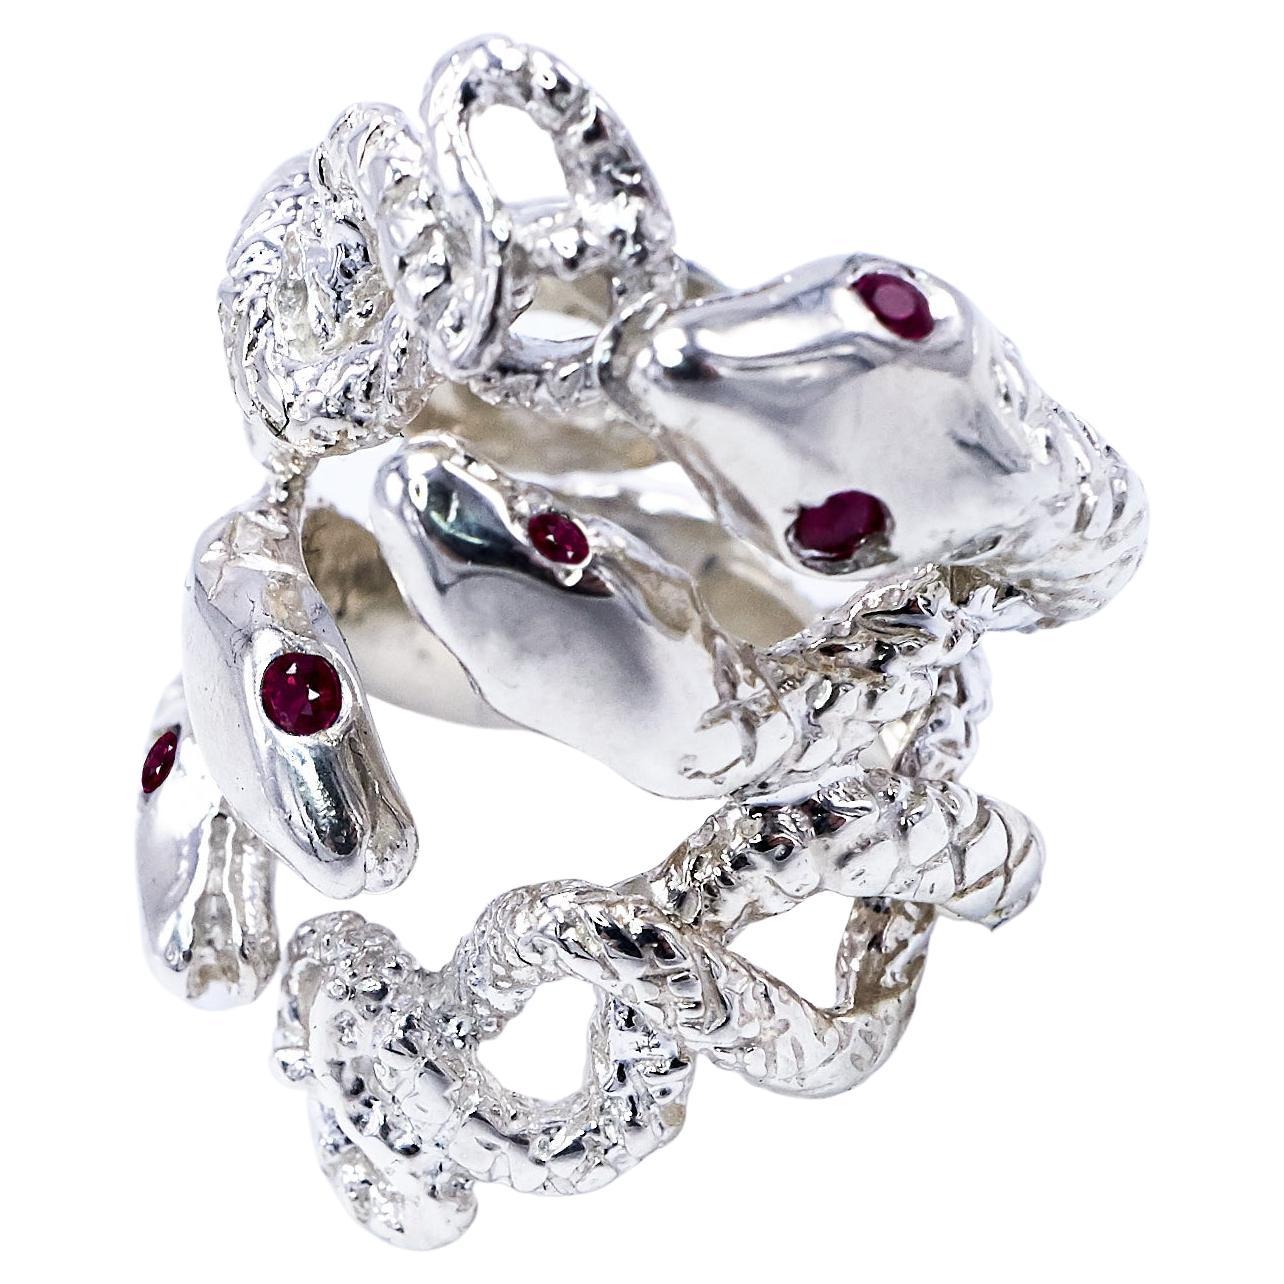 Ruby Snake Ring Silver Statement Cocktail Ring Adjustable Onesie J Dauphin